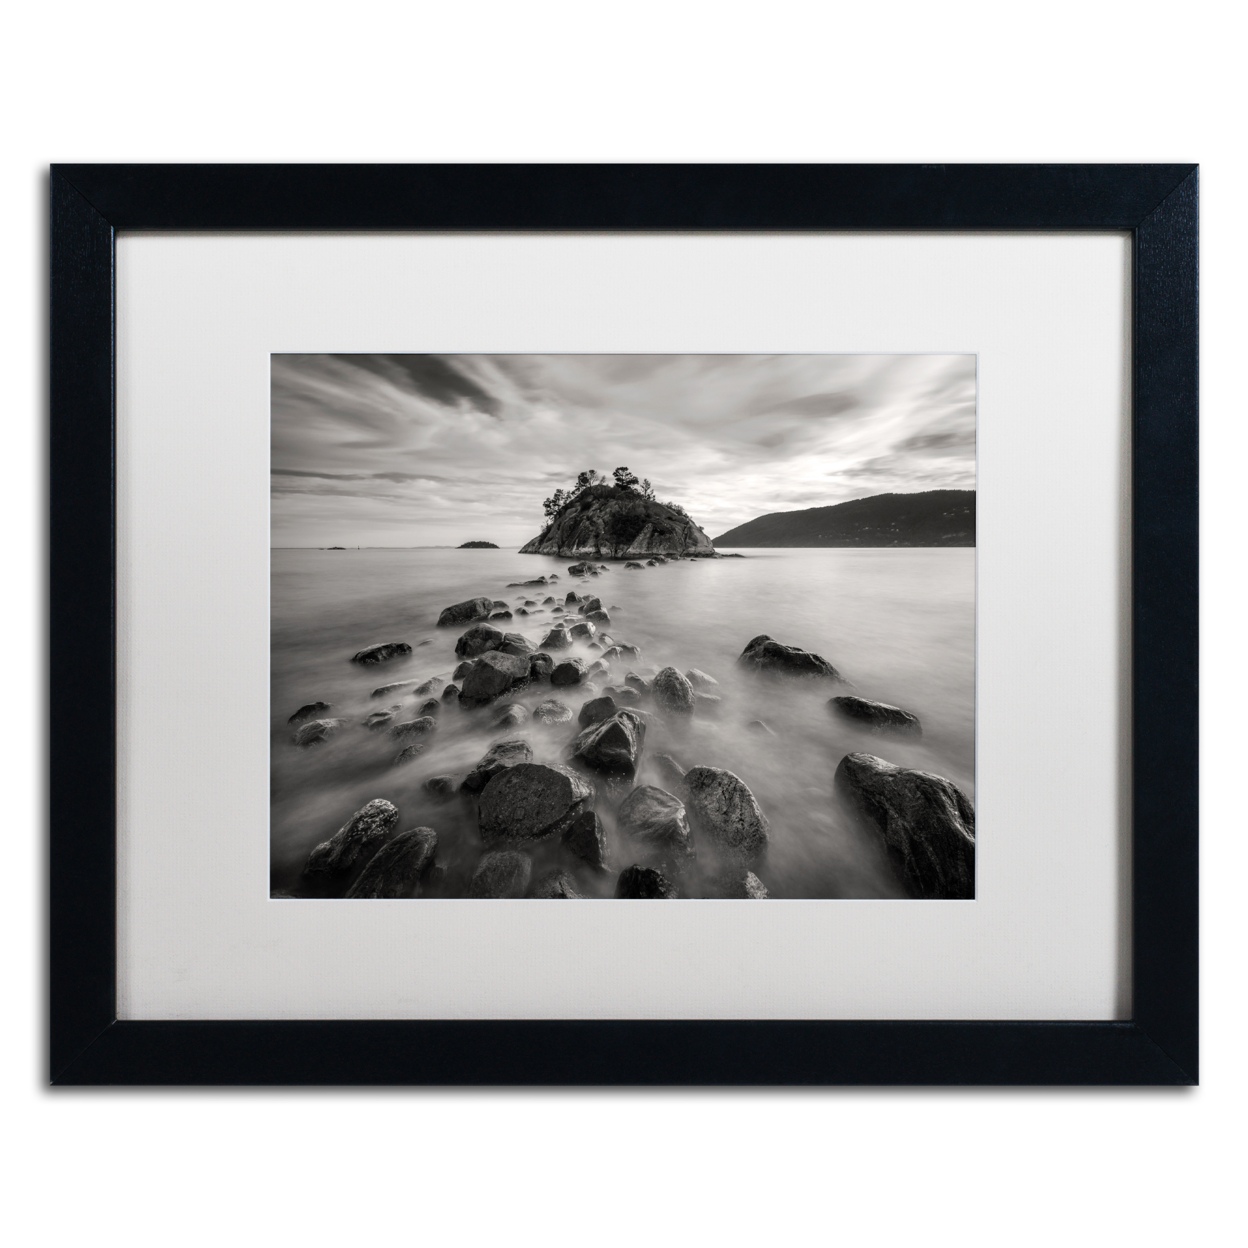 Pierre Leclerc 'Whytecliff Park BW' Black Wooden Framed Art 18 X 22 Inches